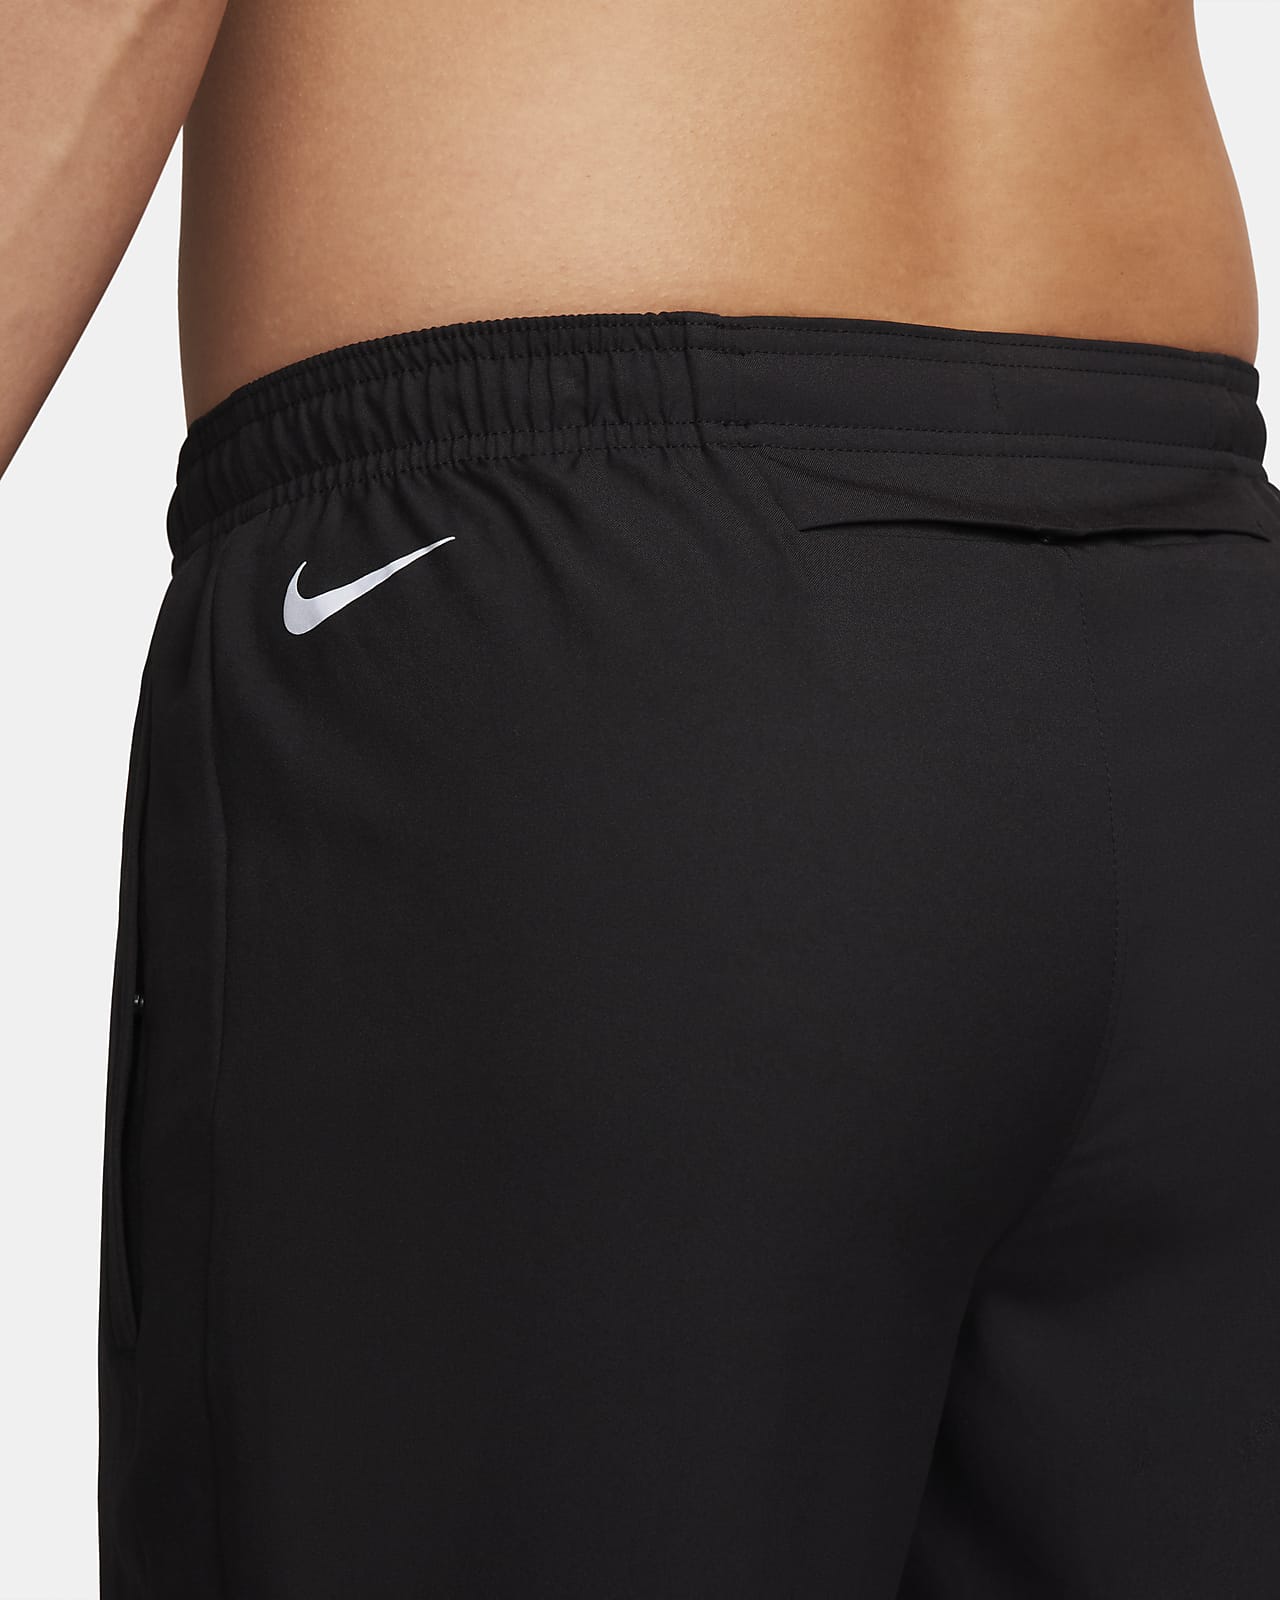 Nike Challenger Flash Men's Dri-FIT Woven Running Trousers